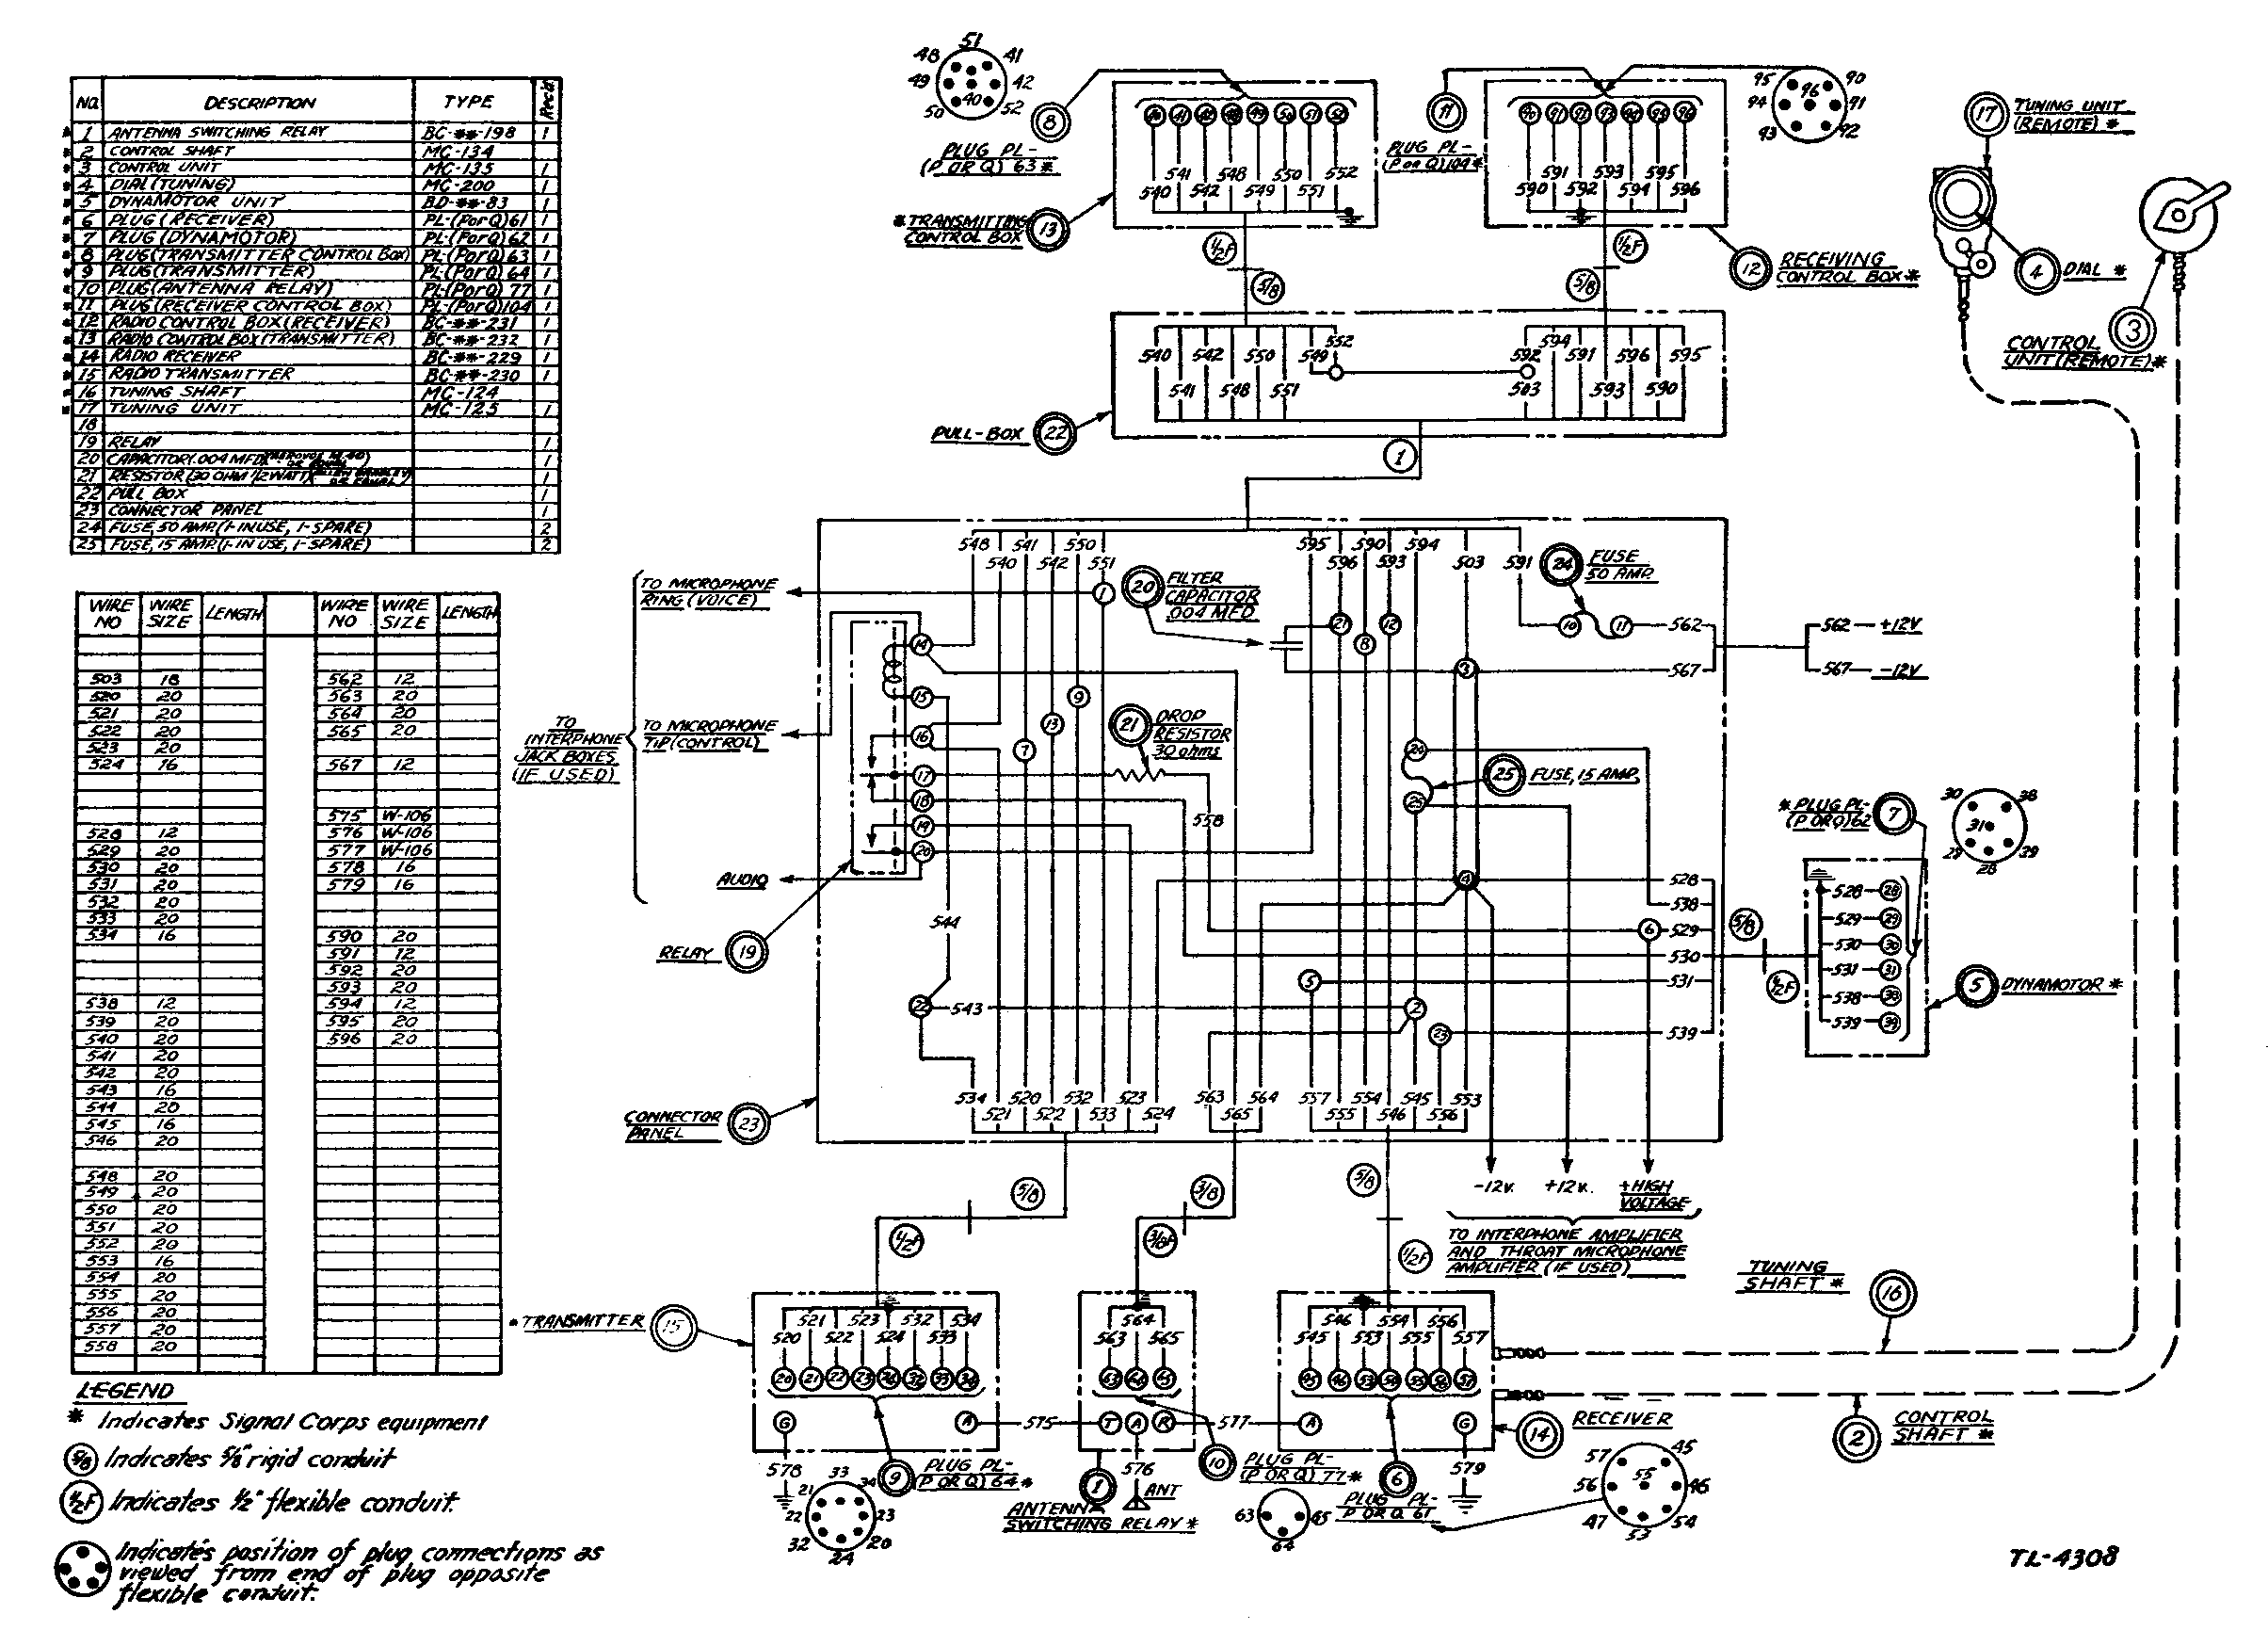 Electrical Junction Box Wiring Diagram